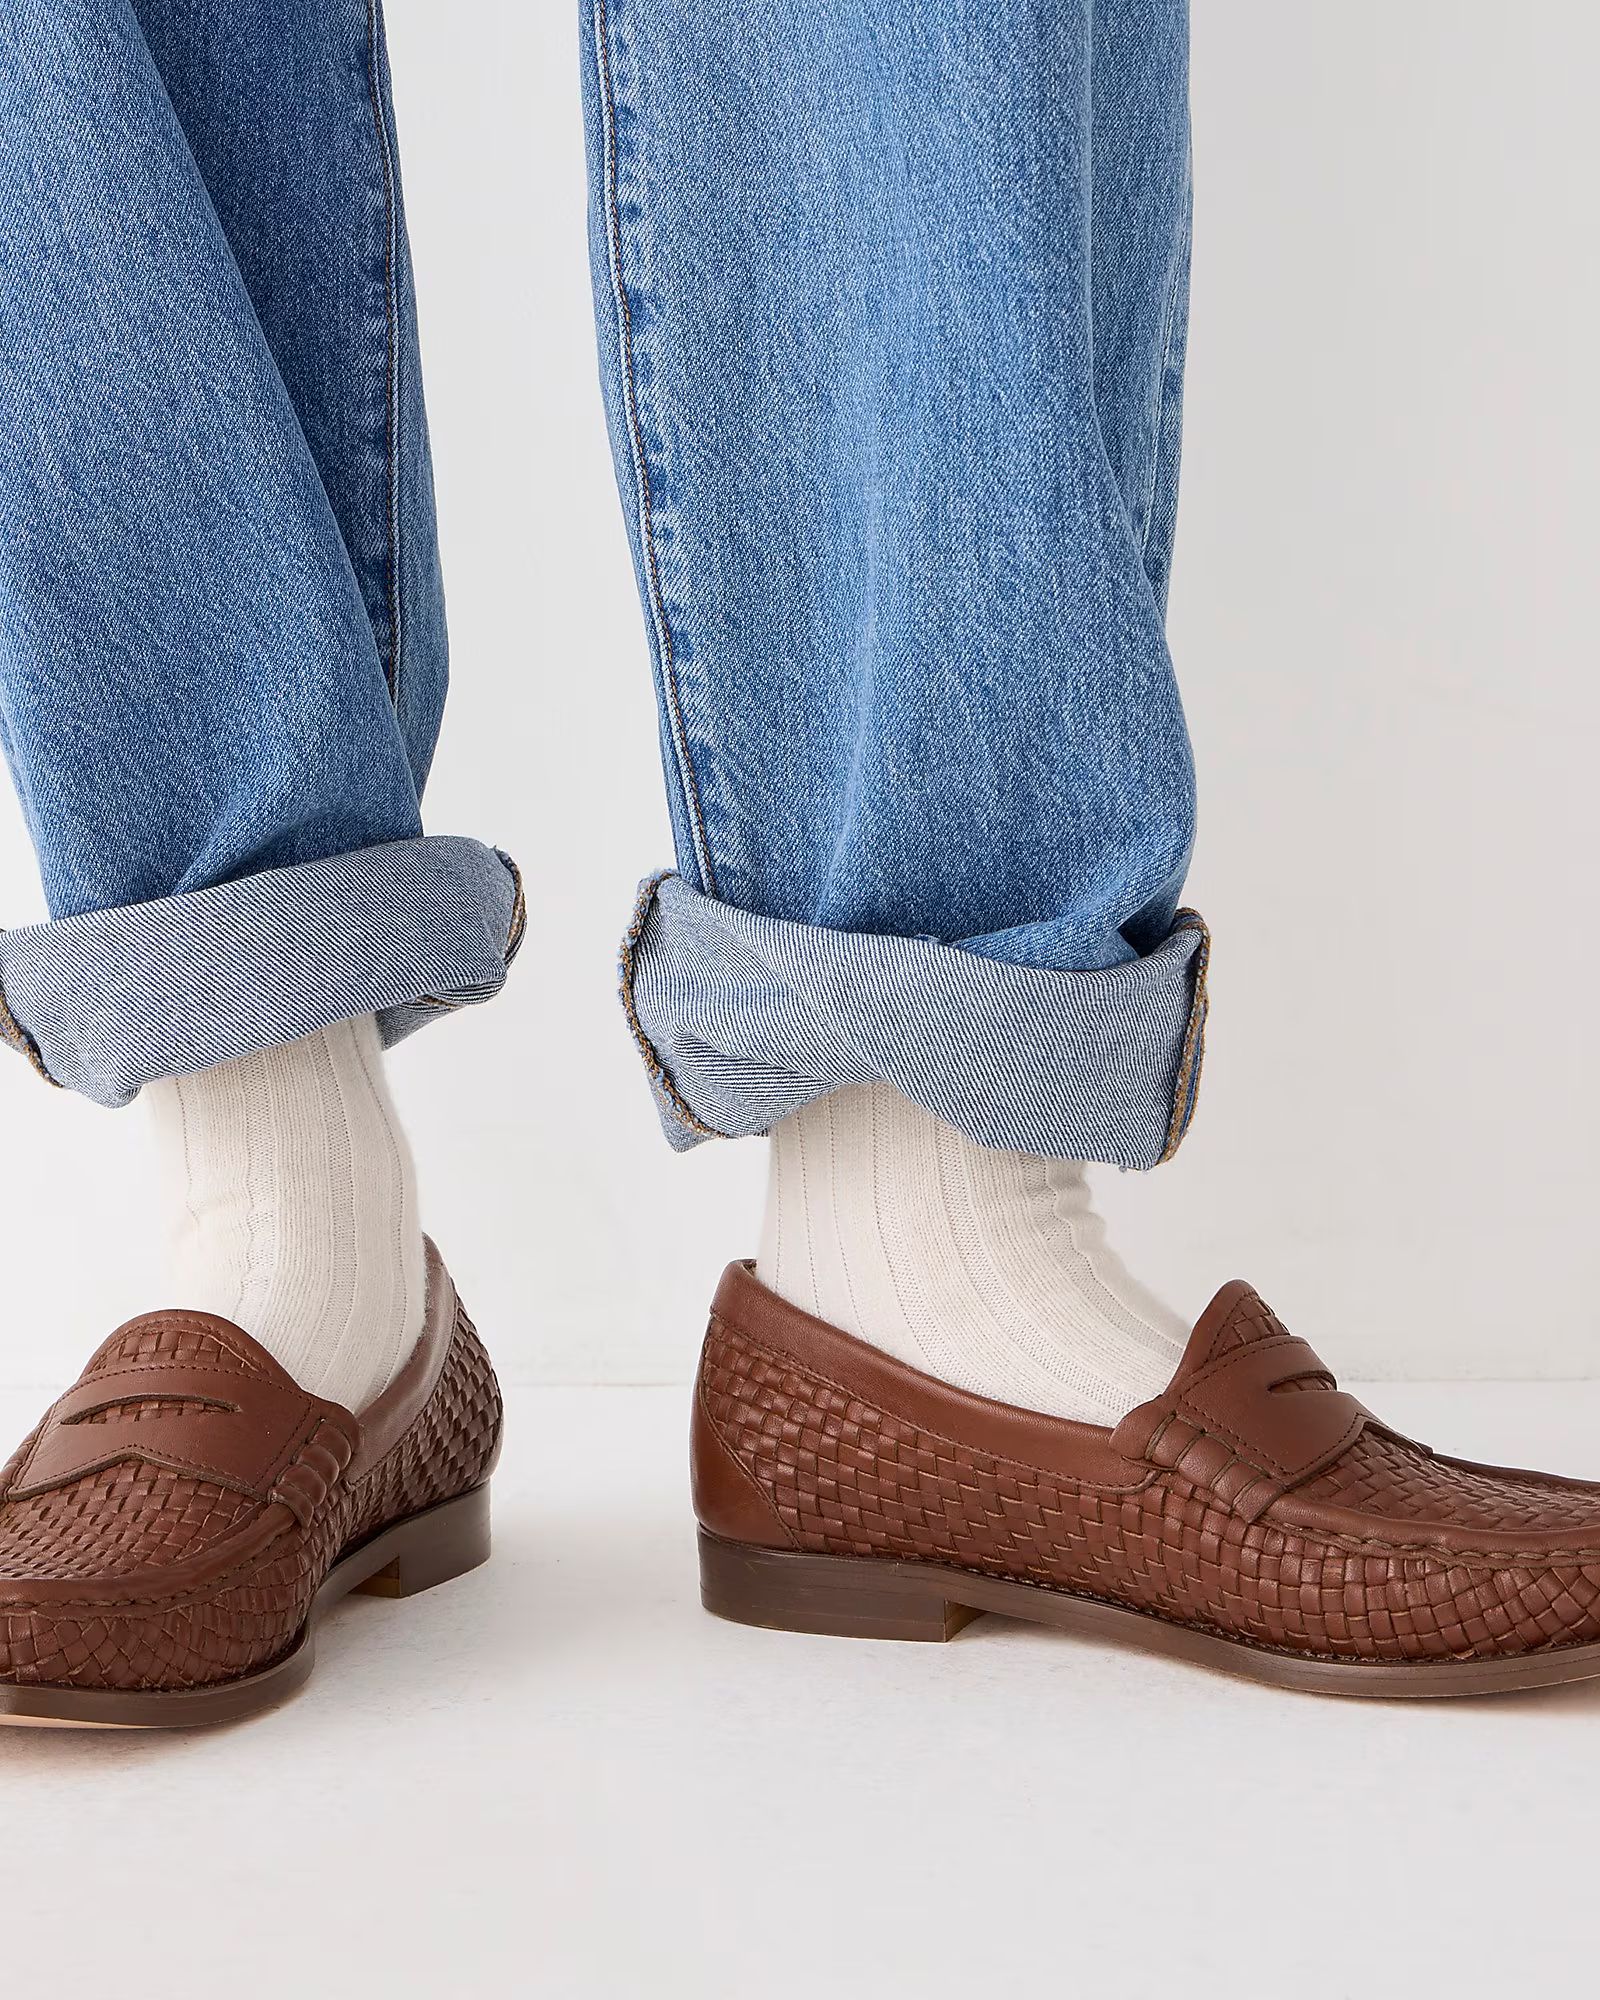 Winona penny loafers in woven Italian leather | J.Crew US